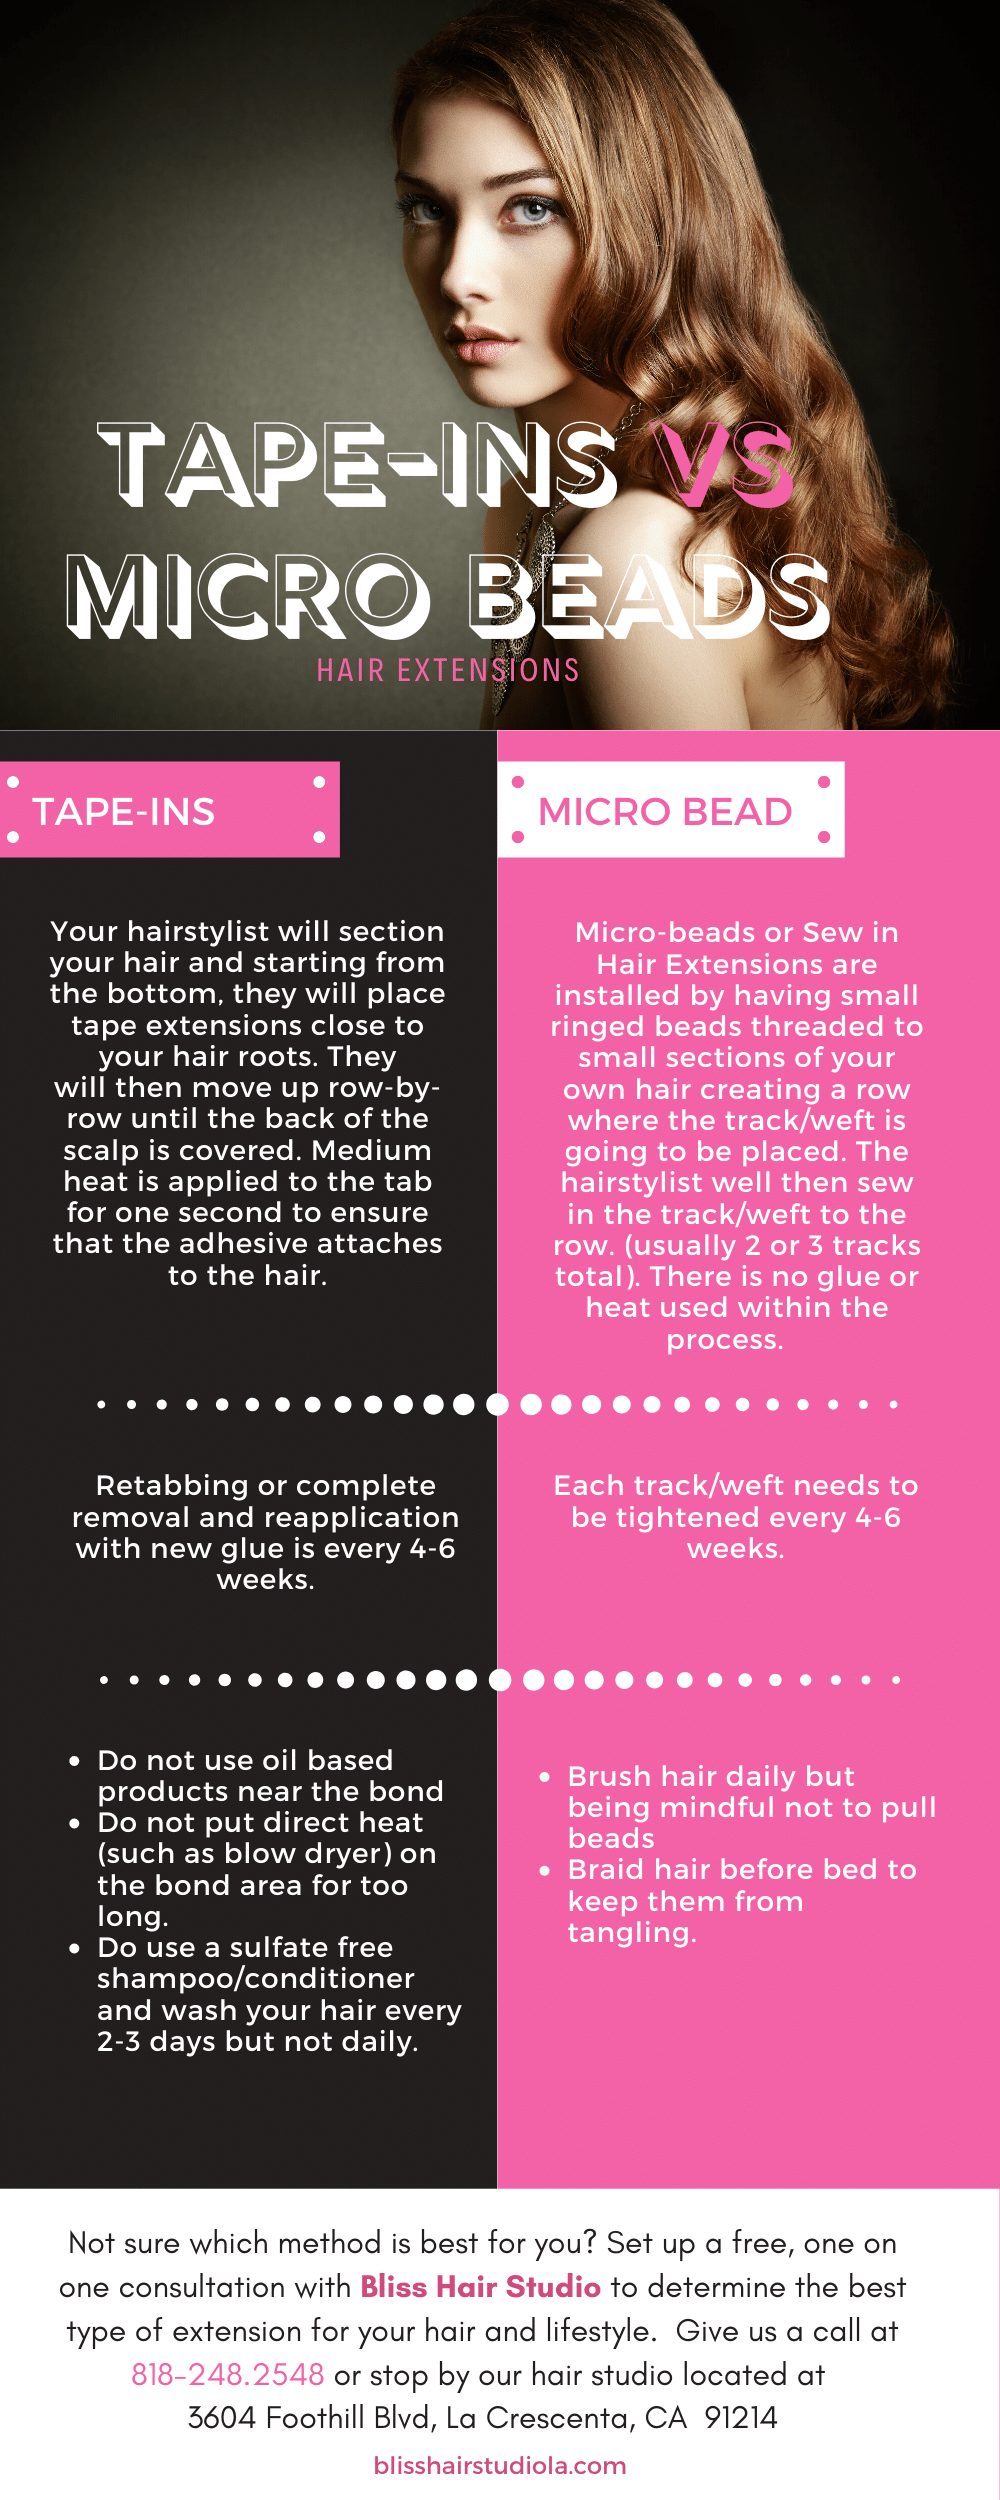 Tape-ins vs Micro beads Infographic